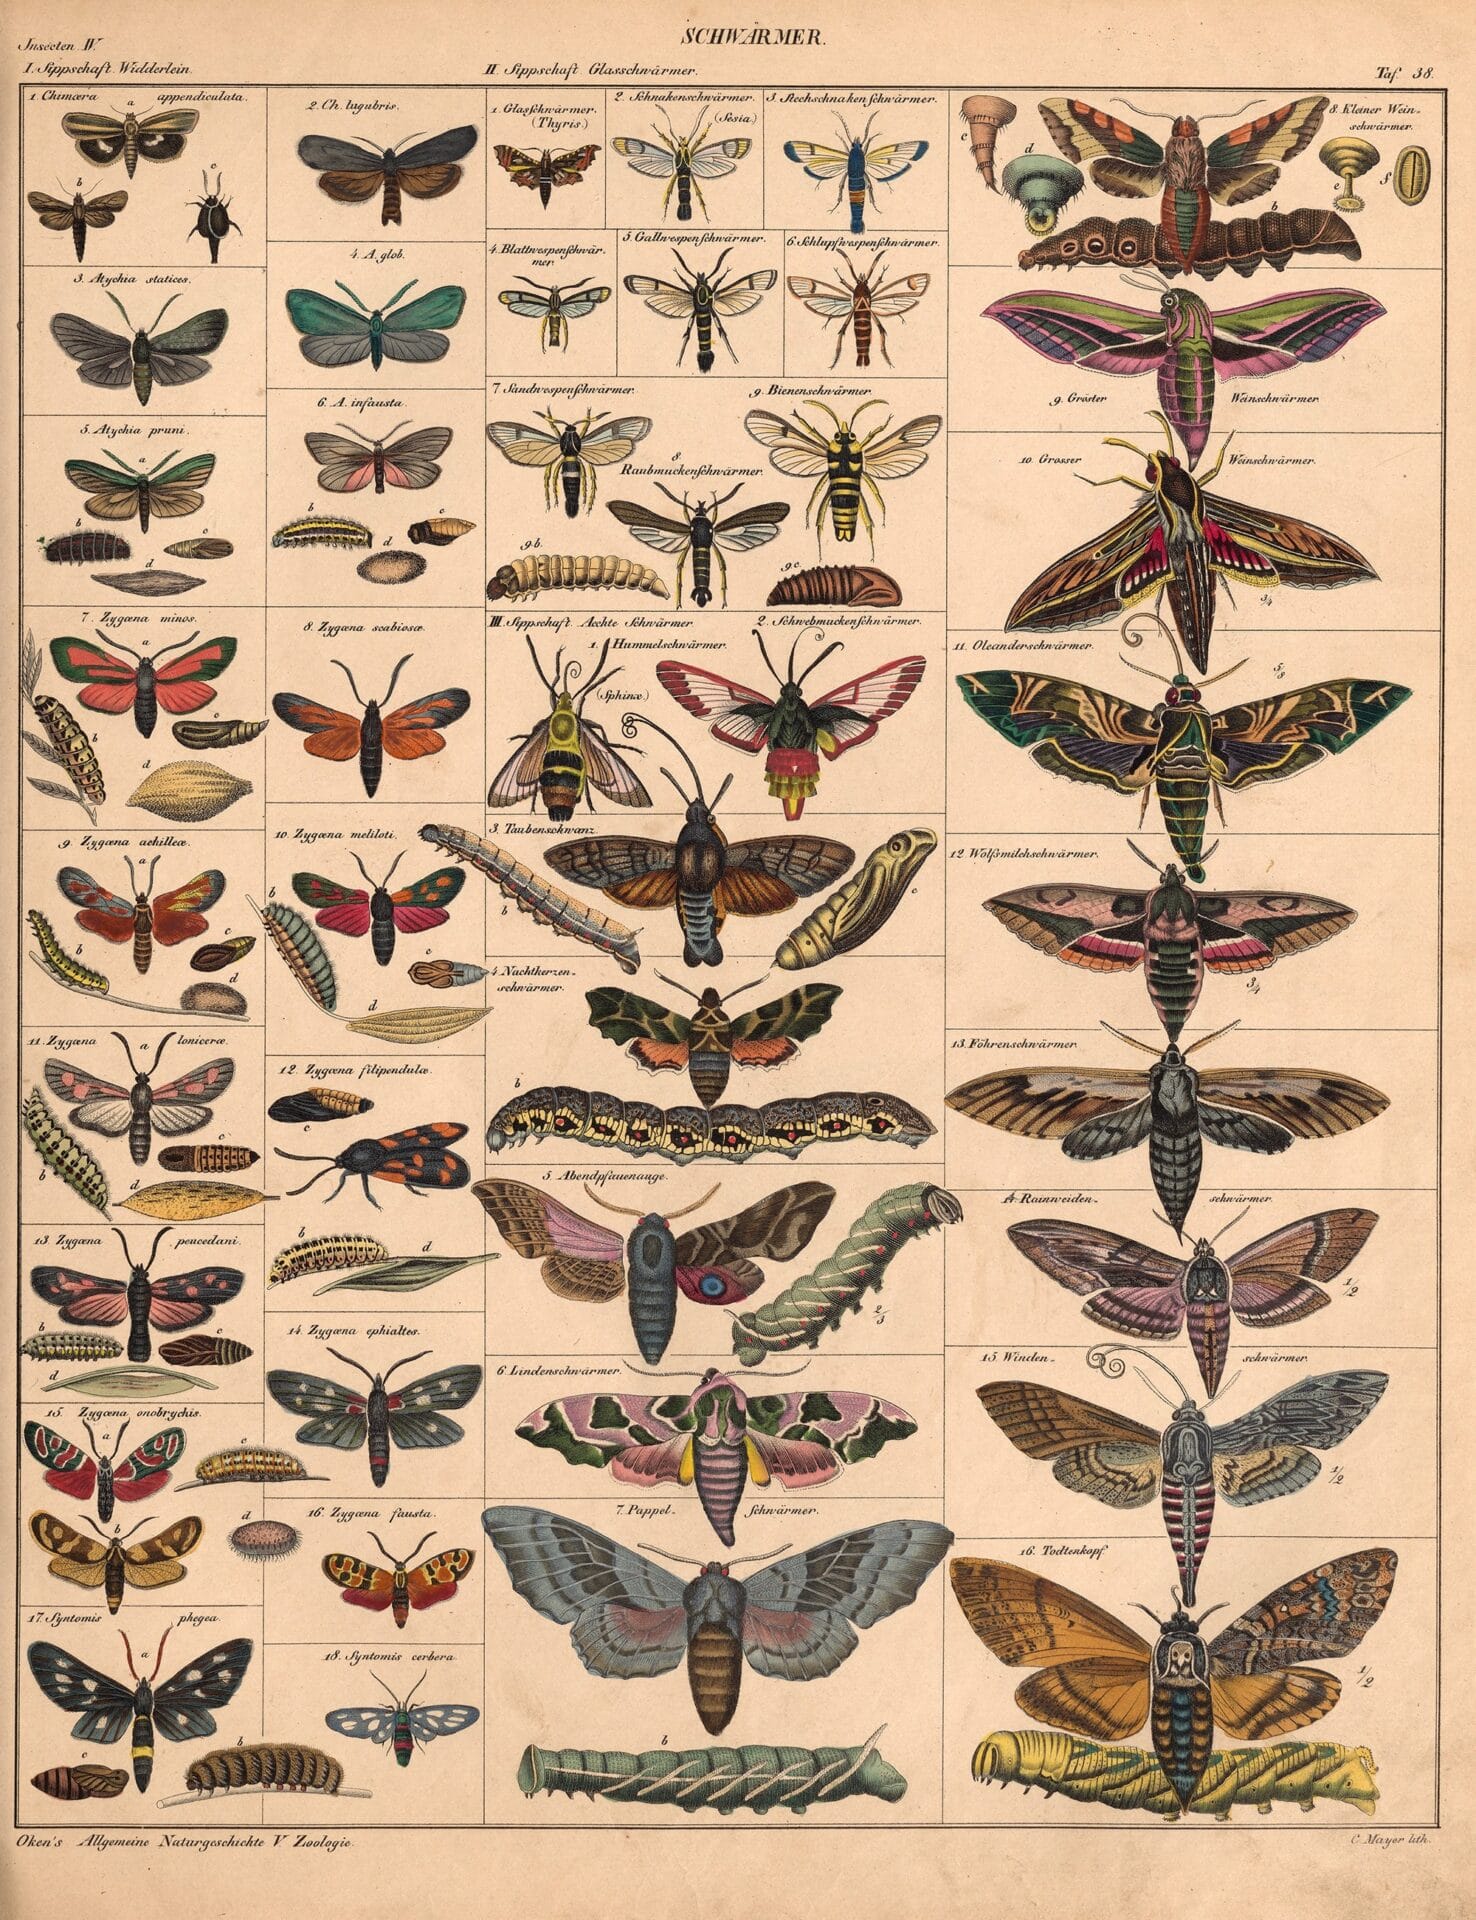 an 18th-century natural history book illustration of moths, some shown at their larval and pupae stages